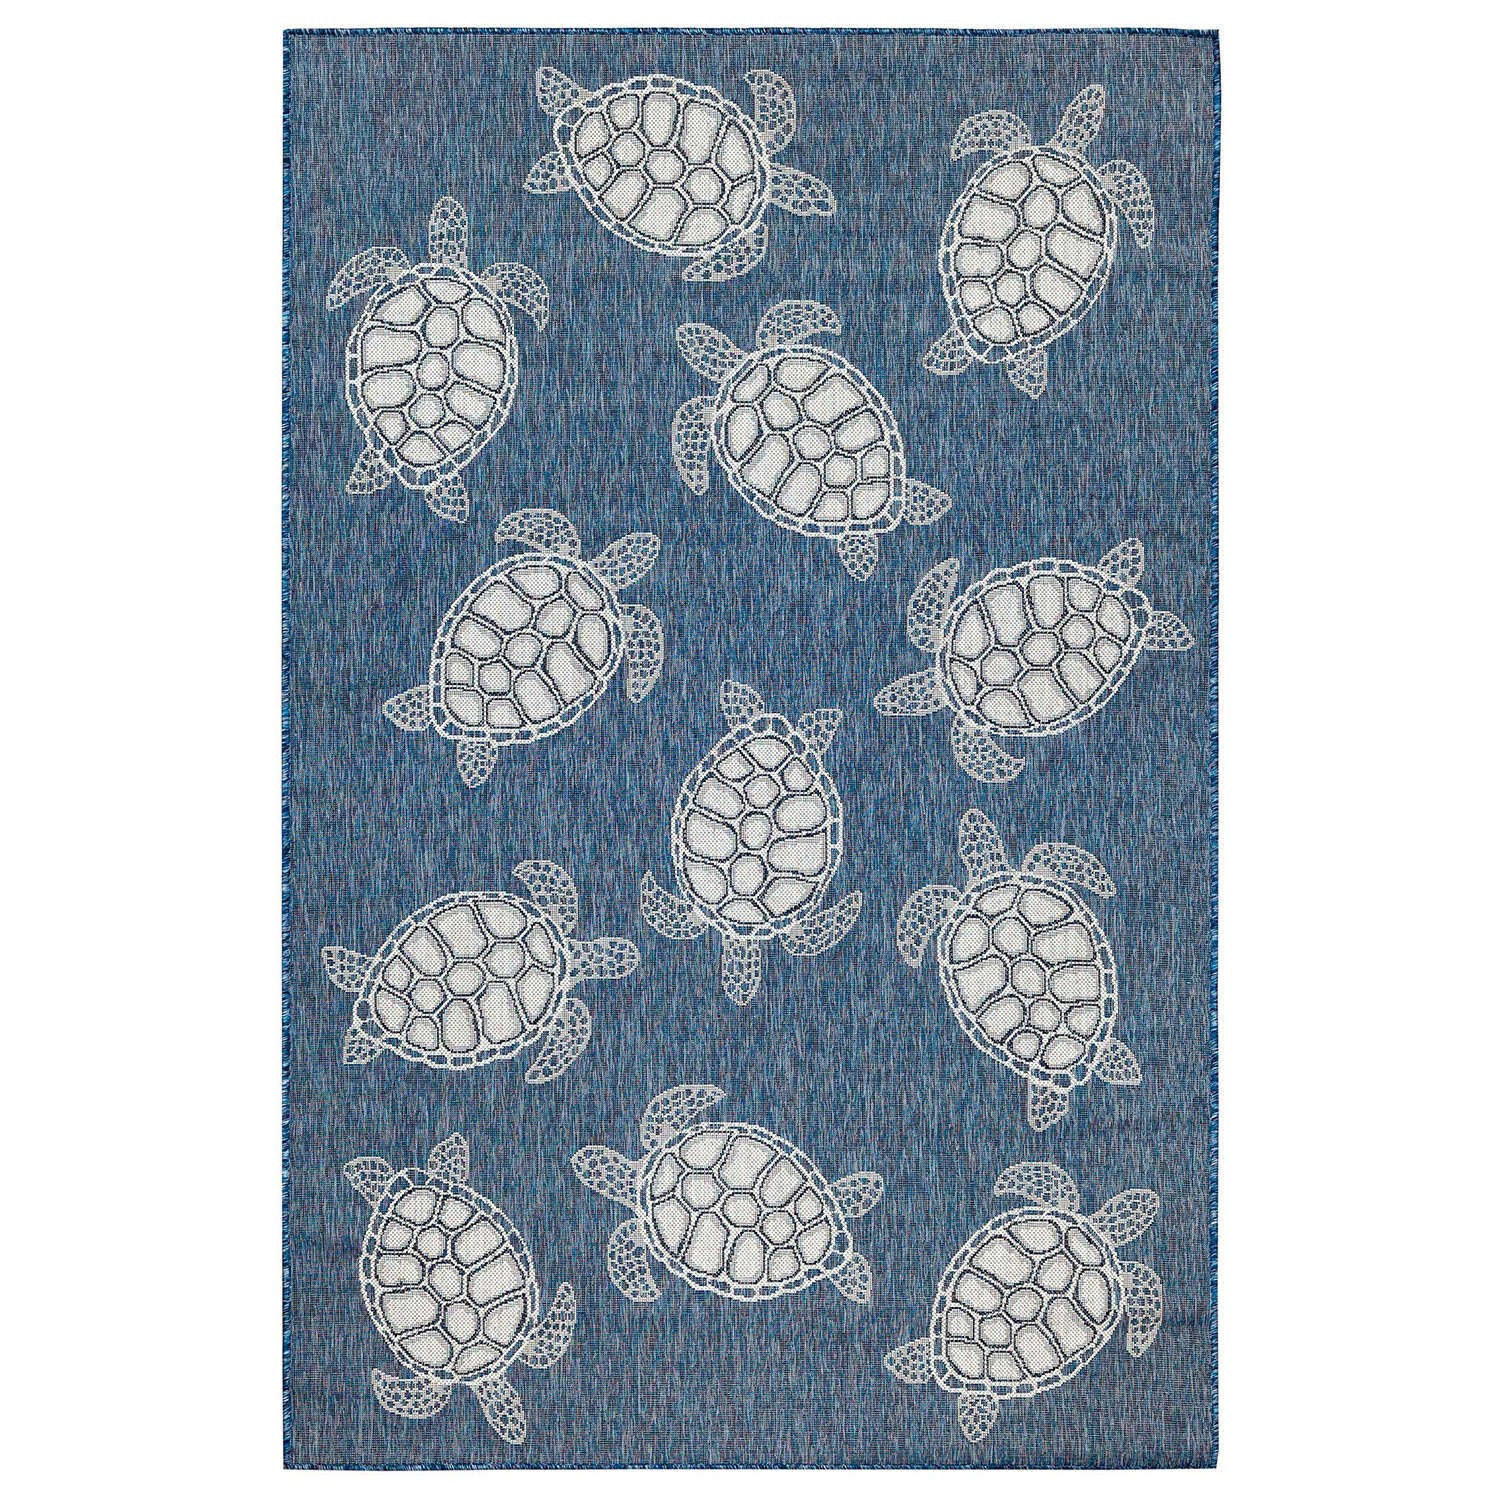 Liora Manne Carmel Low Profile  Easy Care Indoor/Outdoor Woven Rug- Seaturtles Navy  Product Image